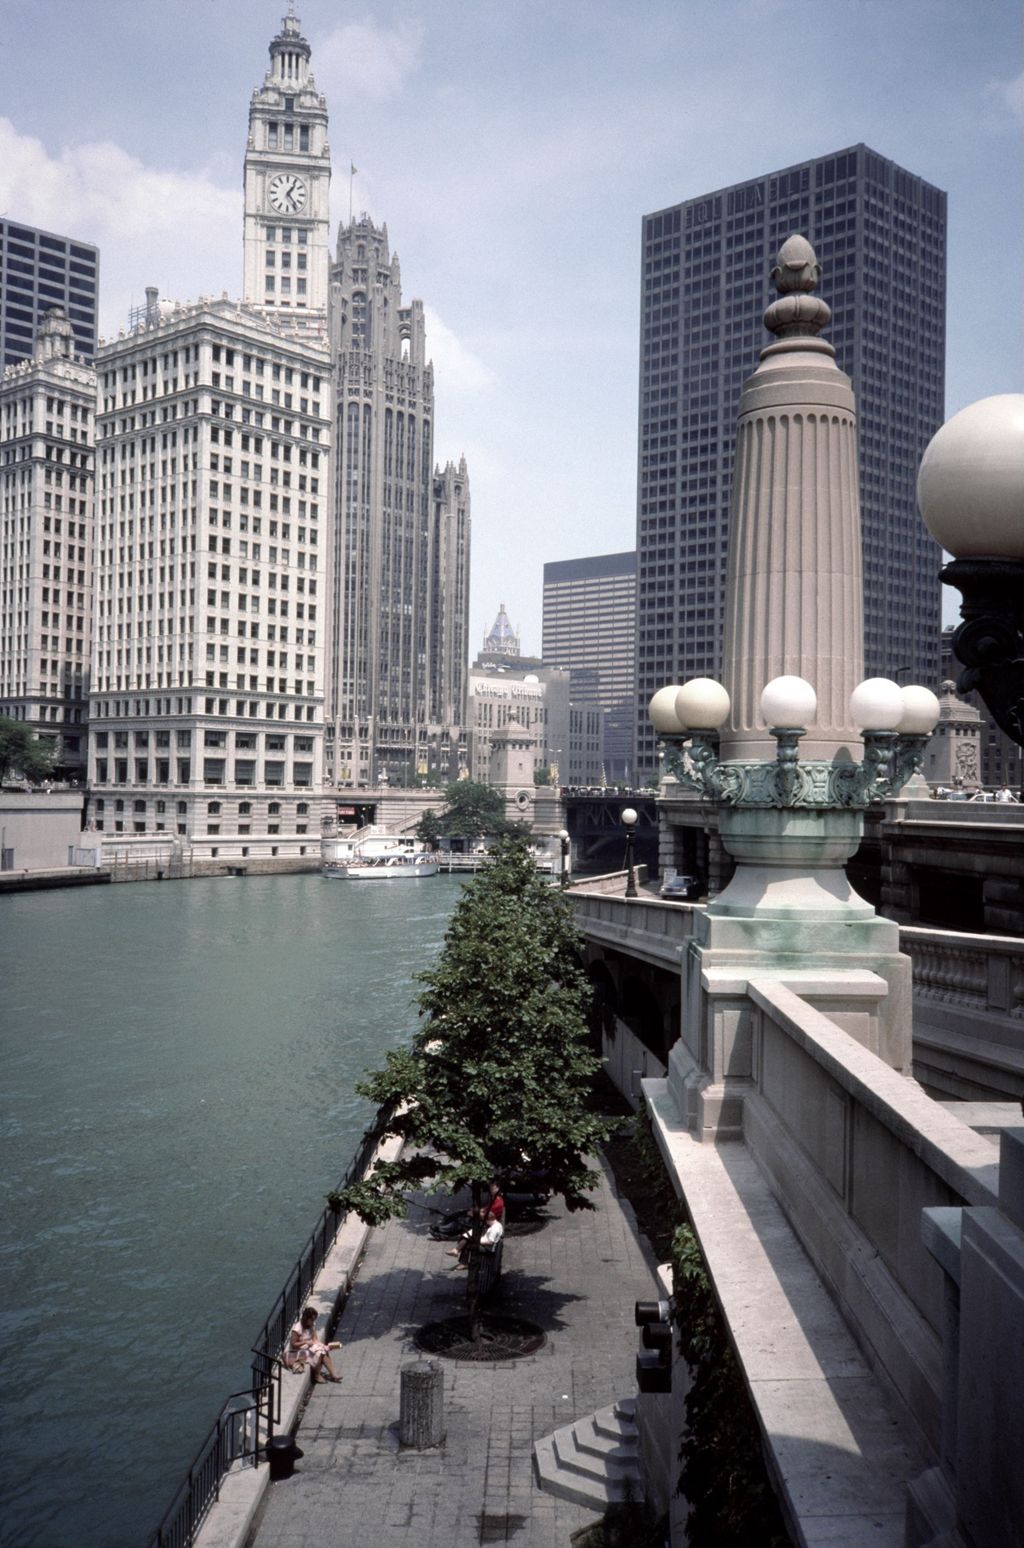 Riverfront walkway, Wrigley Building, Tribune Tower, and Equitable Building